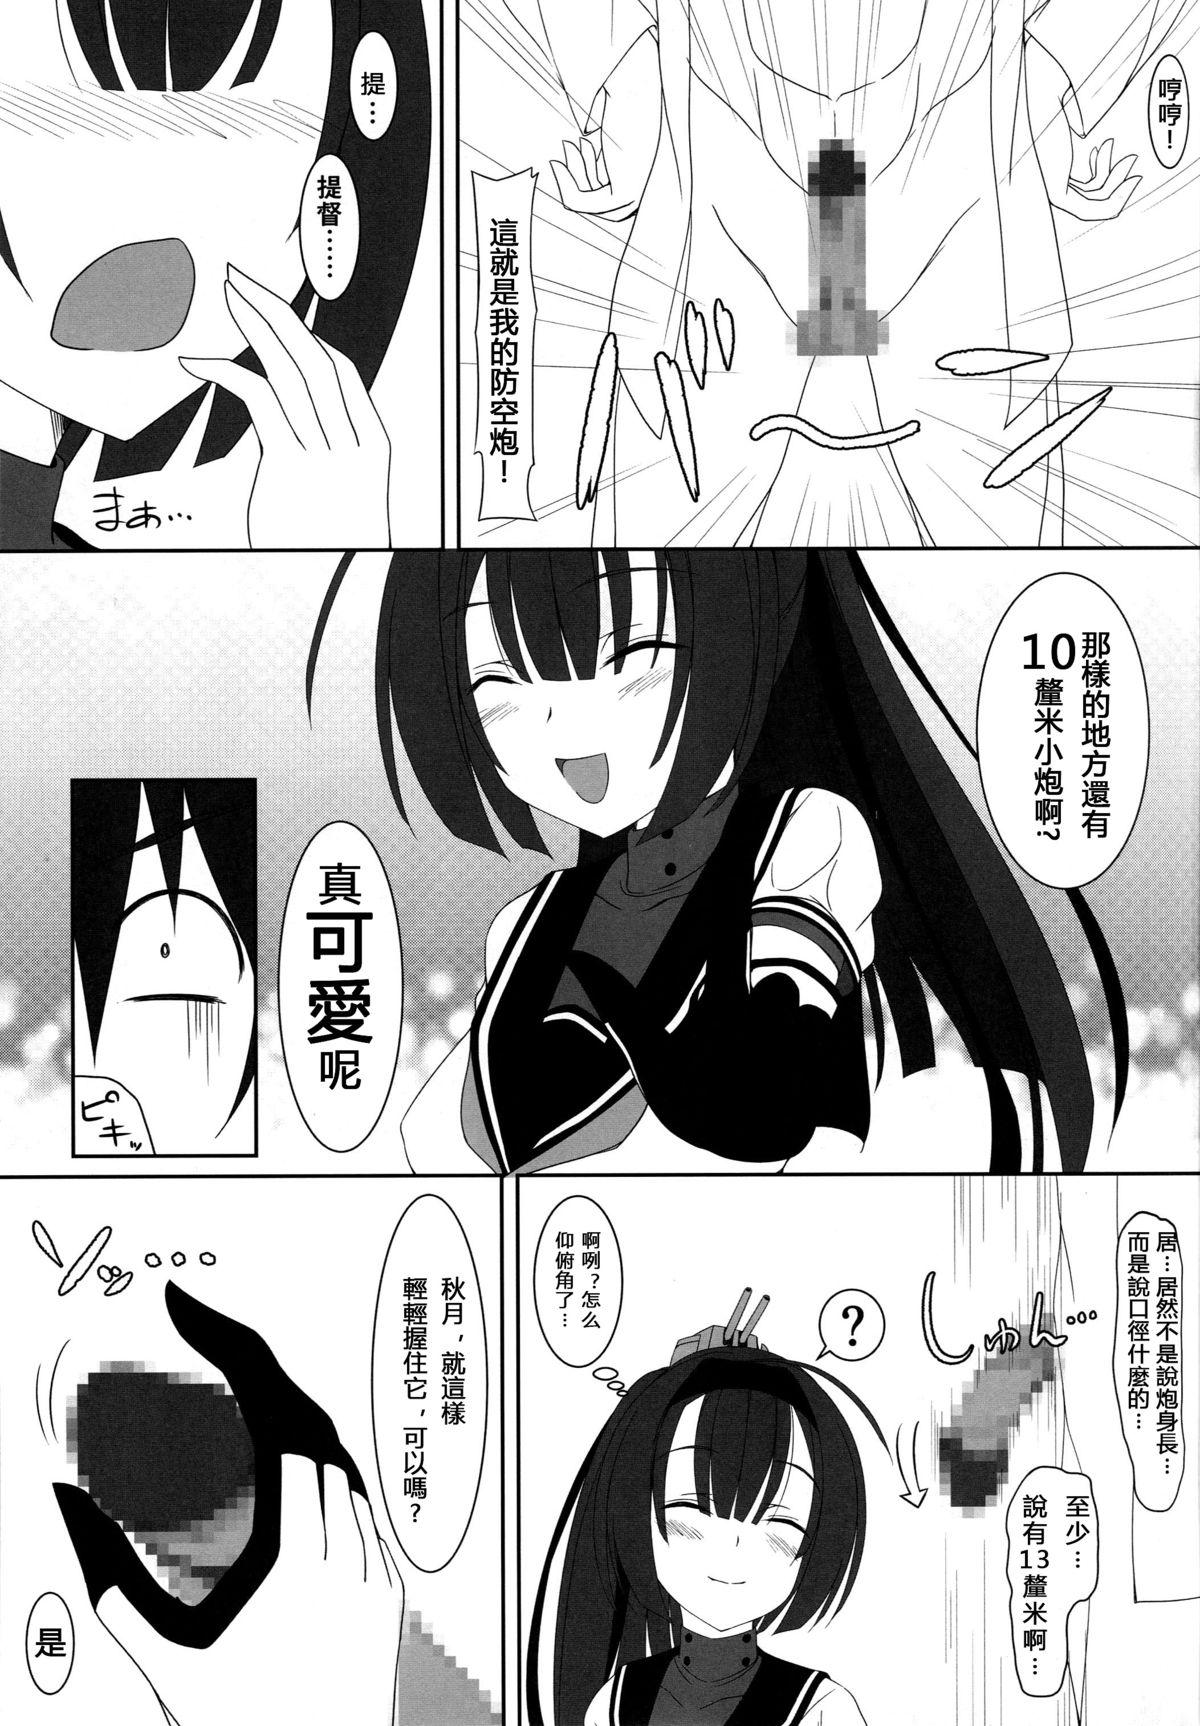 Orgia M-REPO 05 - Kantai collection Old Young - Page 9